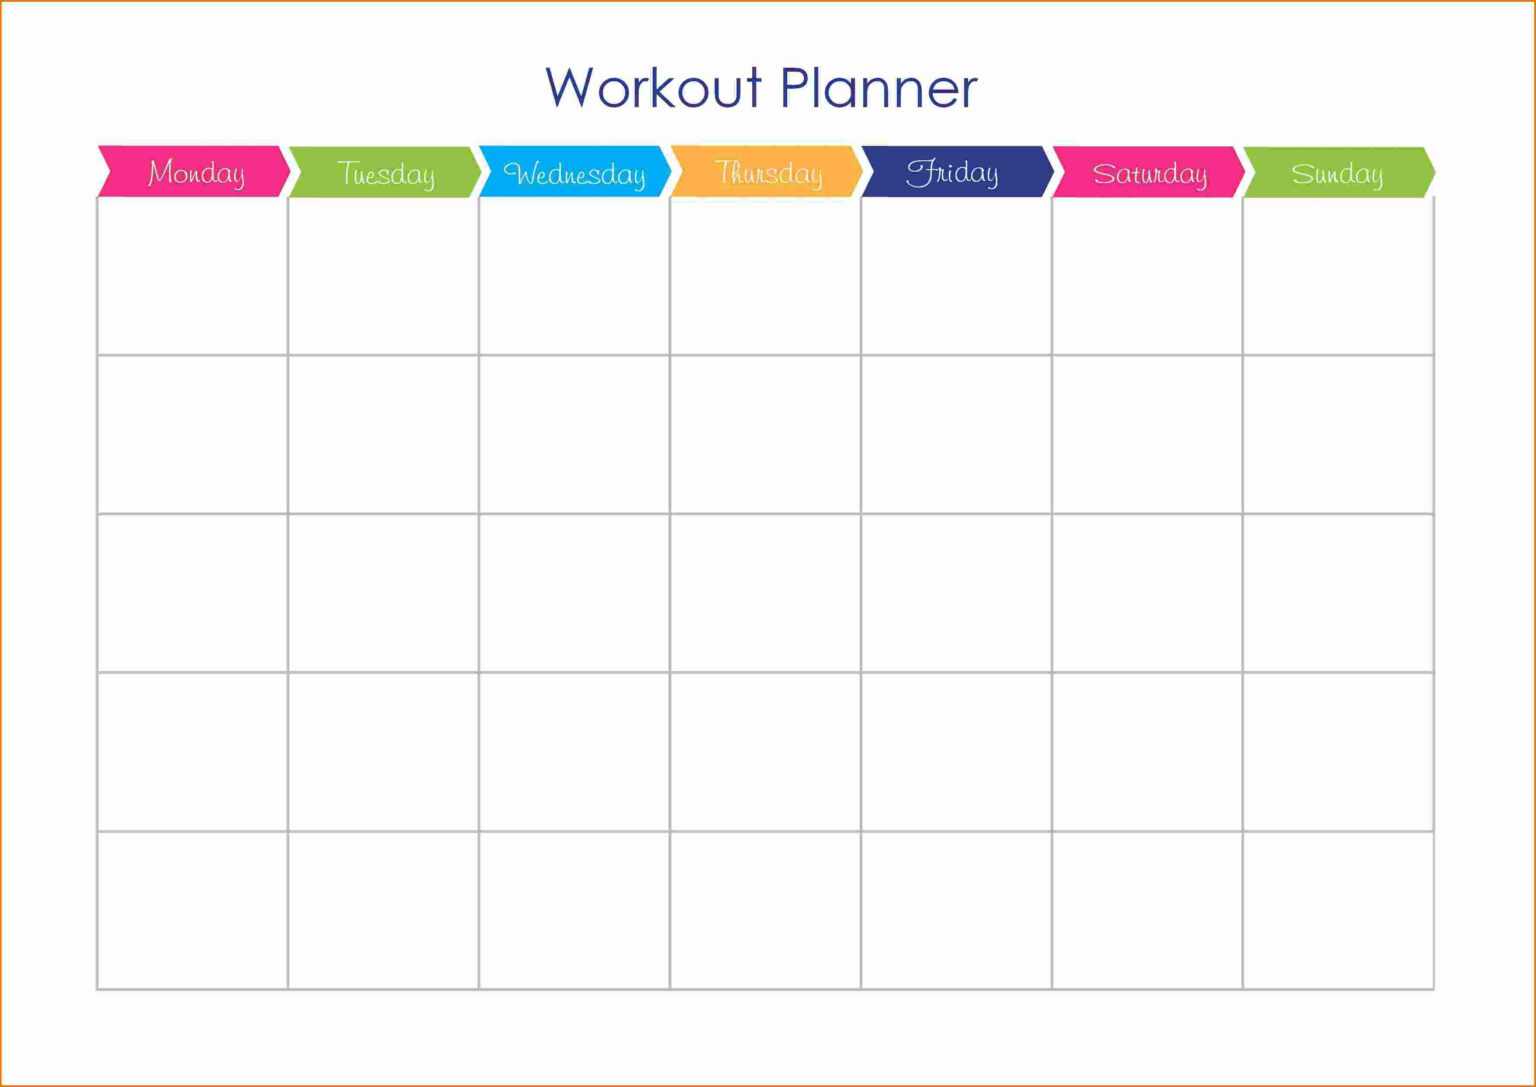 workout-plan-calendar-template-workout-and-yoga-pics-inside-blank-workout-schedule-template